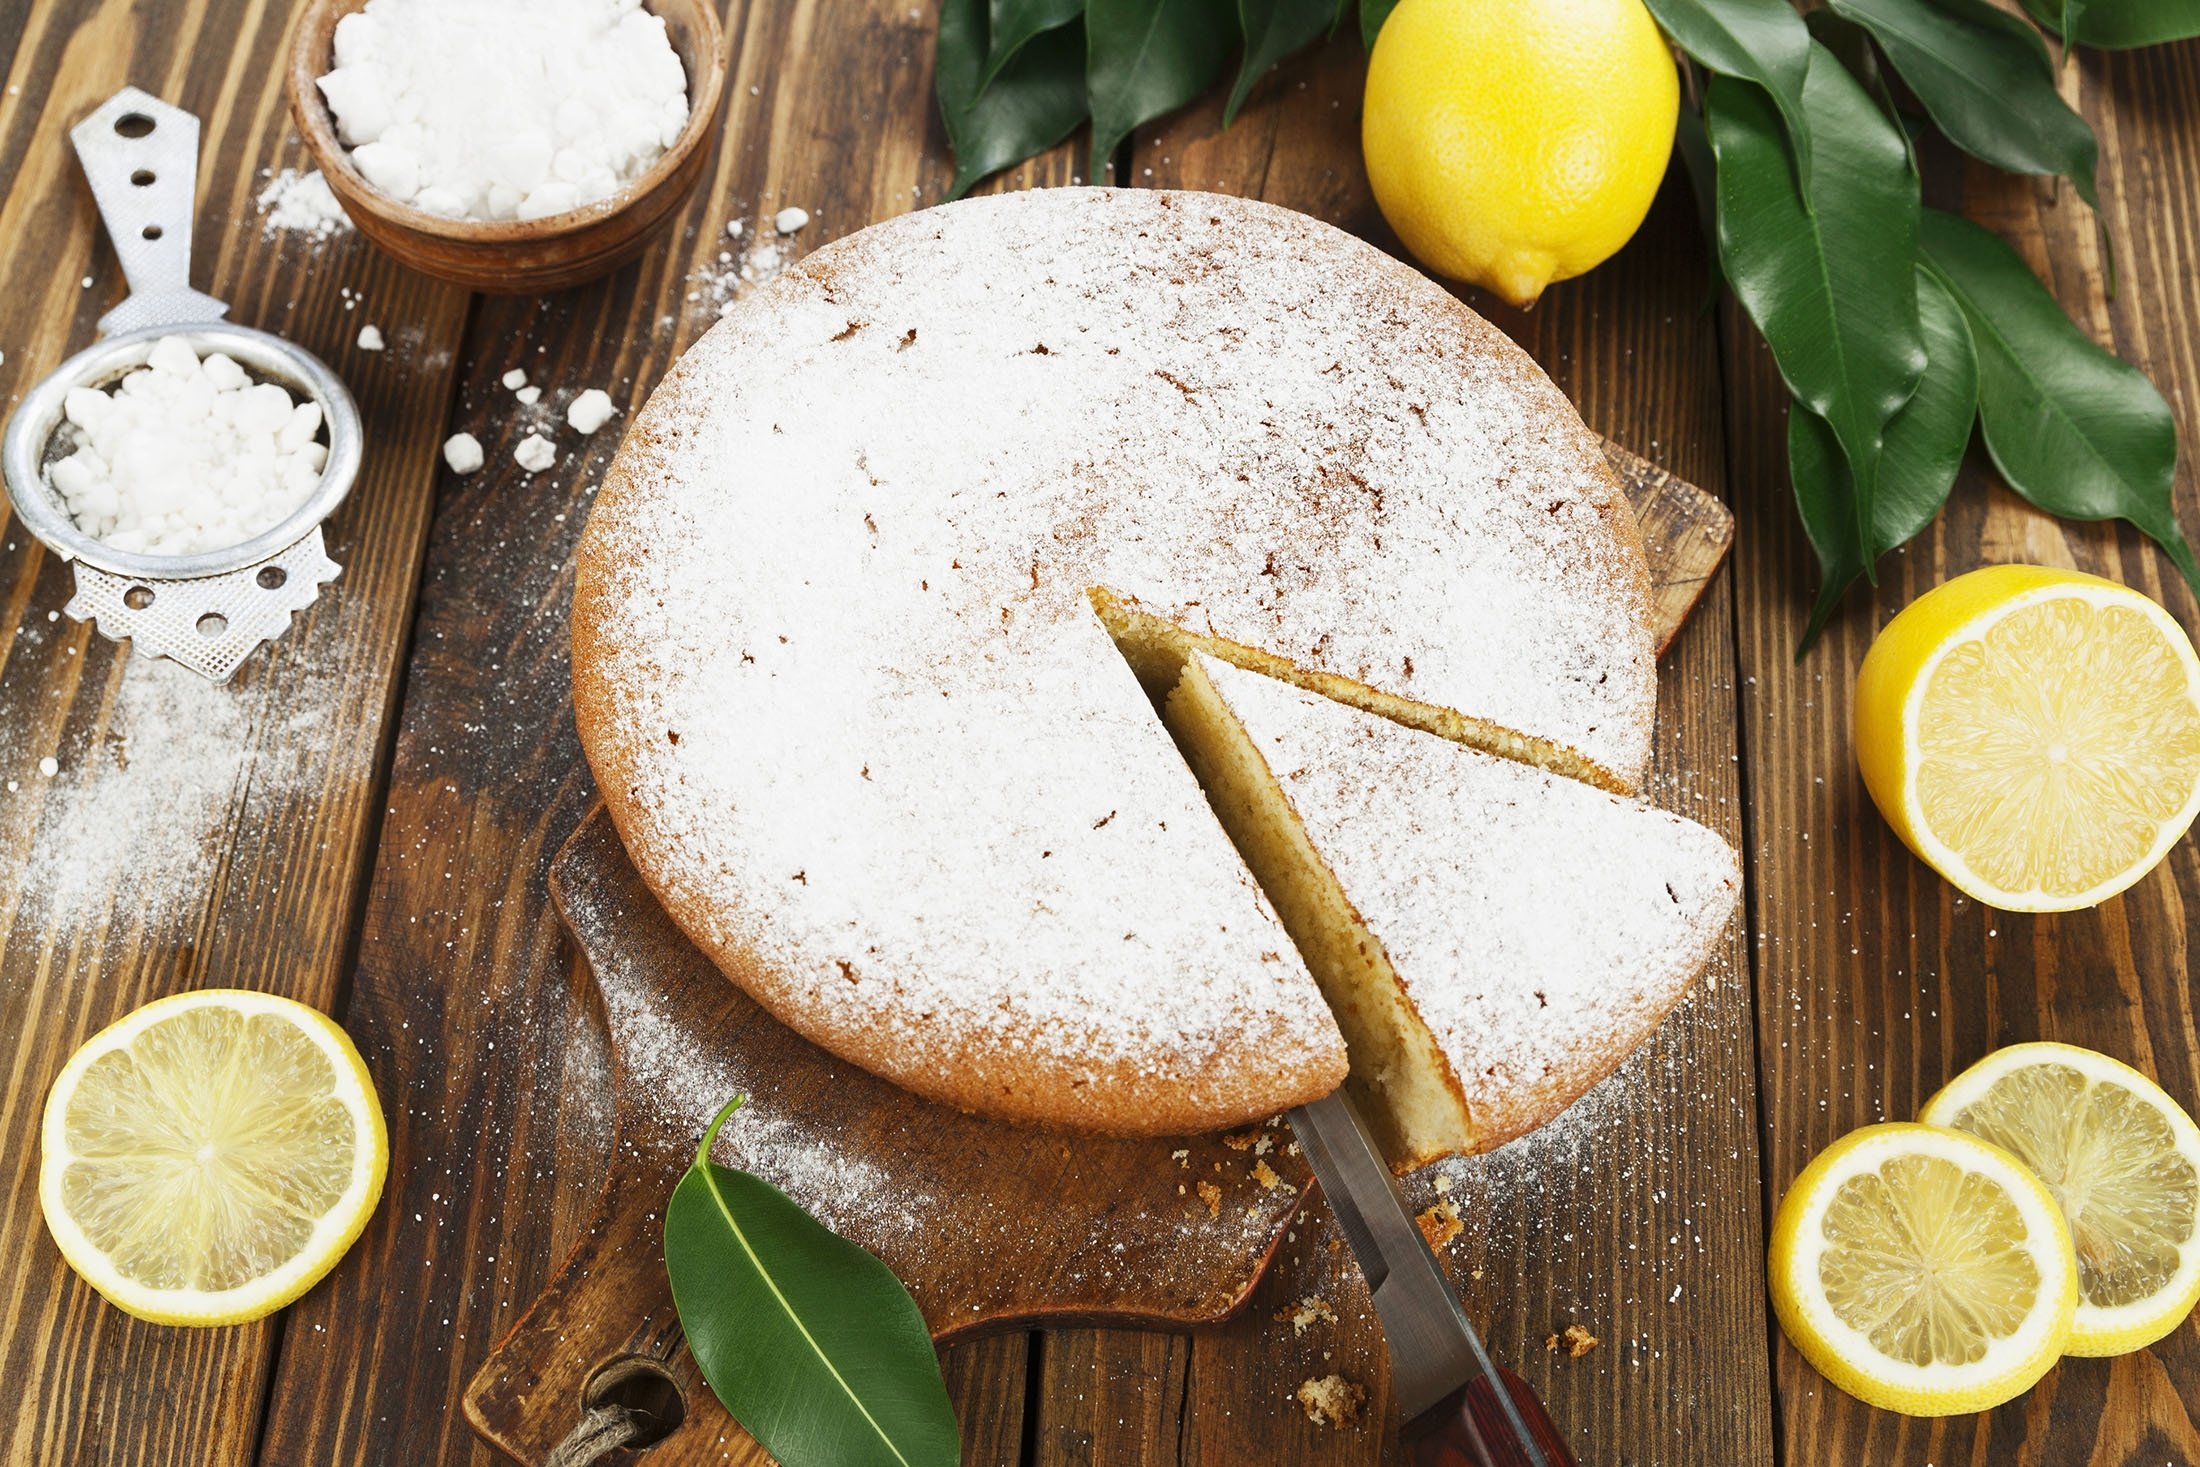 Fragrant lemon cake has a wonderful texture that melts in your mouth and a beautiful aroma that turns your head.  (Shutterstock photo)